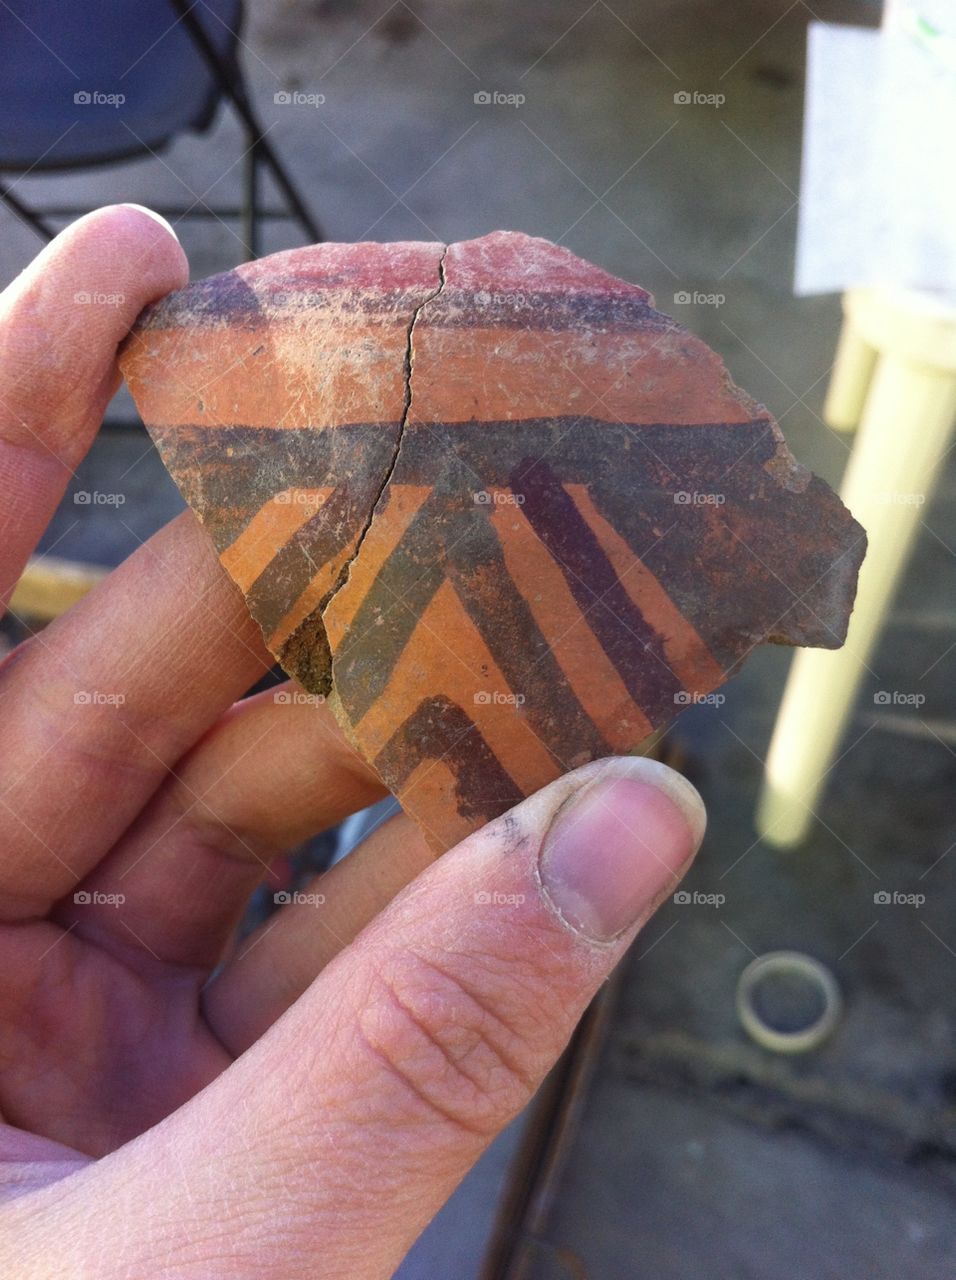 Pottery sherds found in southern Peru 